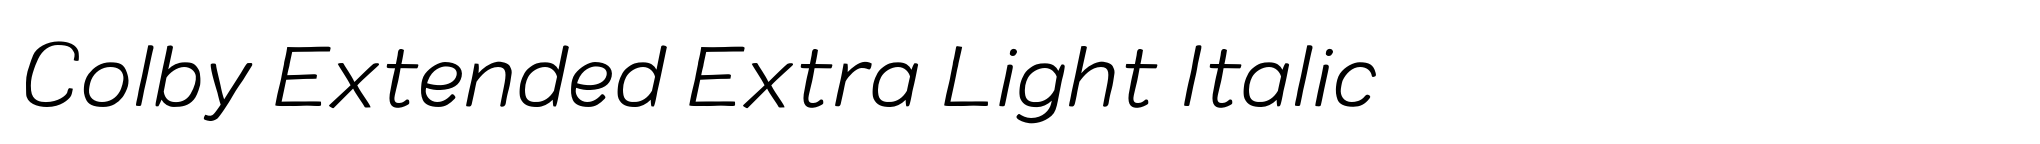 Colby Extended Extra Light Italic image